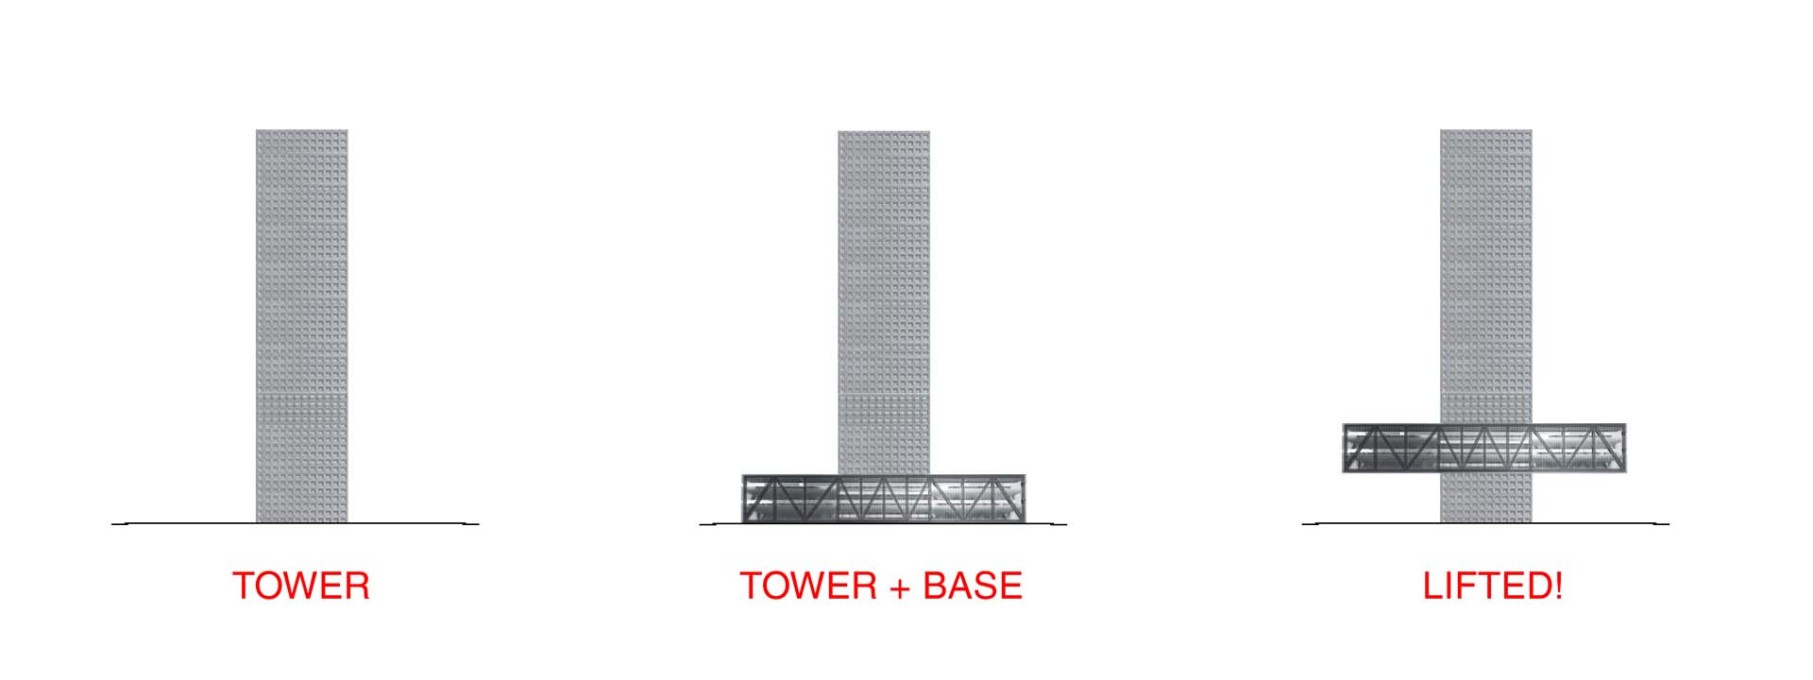 OMA describes how the building&rsquo;s &ldquo;floating base&rdquo; has &ldquo;crept up the tower&hellip;as if lifted by the same speculative euphoria that drives the market&rdquo;. (Image: OMA)